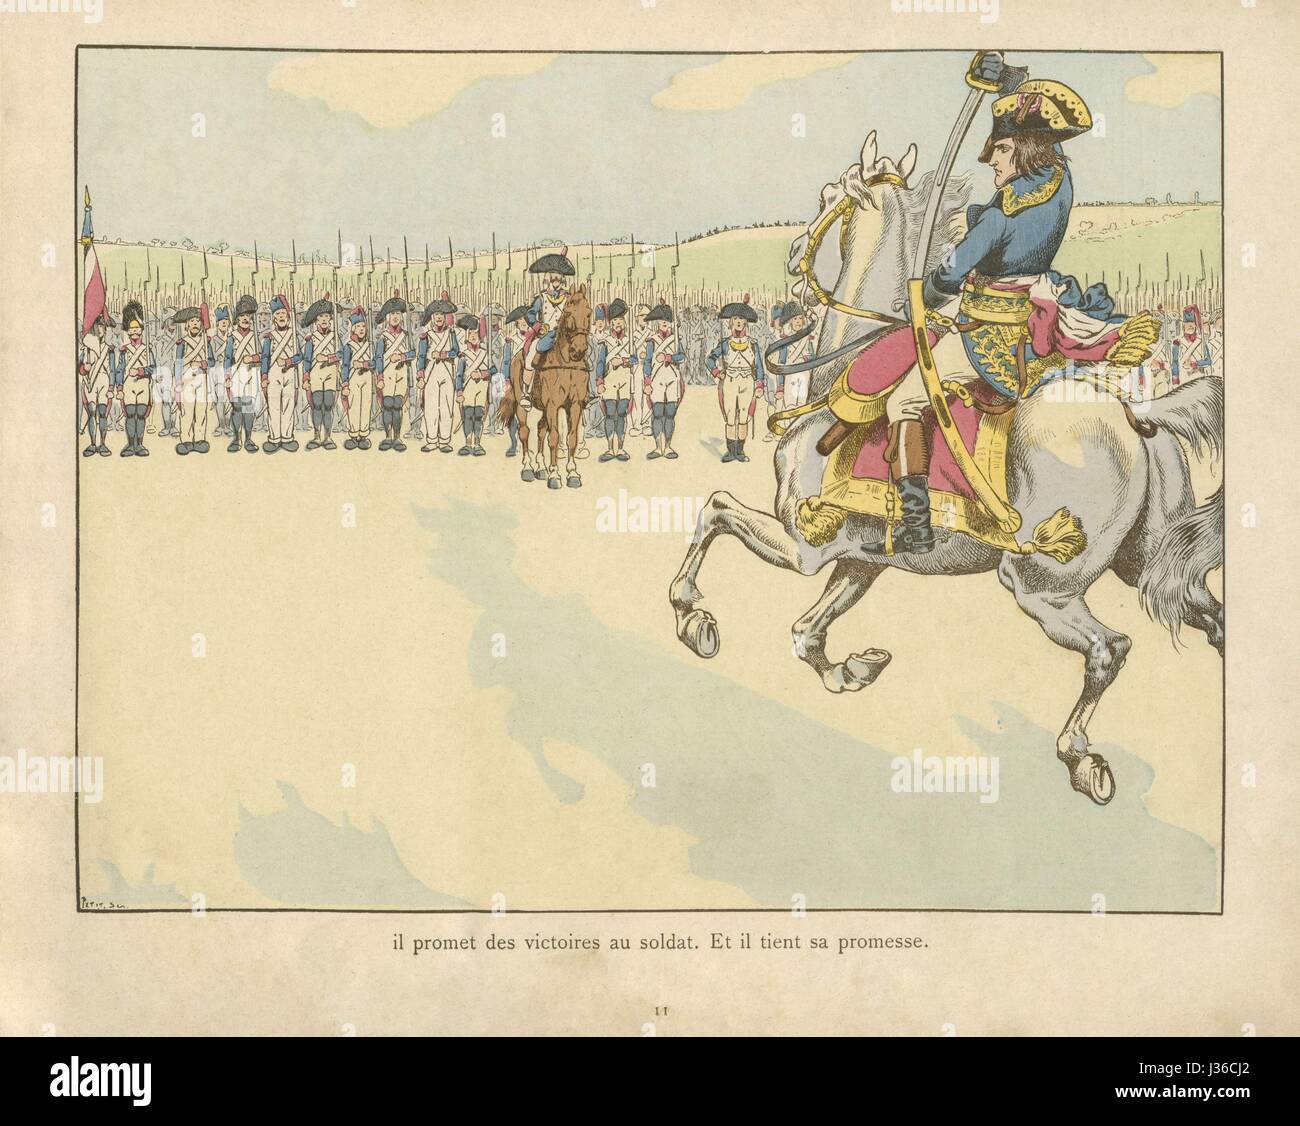 Napoleon Bonaparte turns commander of the Army of Italy on February 23, 1796.    Illustration on page 11 of the book for children 'Le Grand Napoléon des Petits Enfants', written by Jules de Marthold and illustrated by Job. It was published in 1893 by Plon, Nourrit and Cie. Jules de Marthold (1847-1927)  Job (1858-1931) Stock Photo